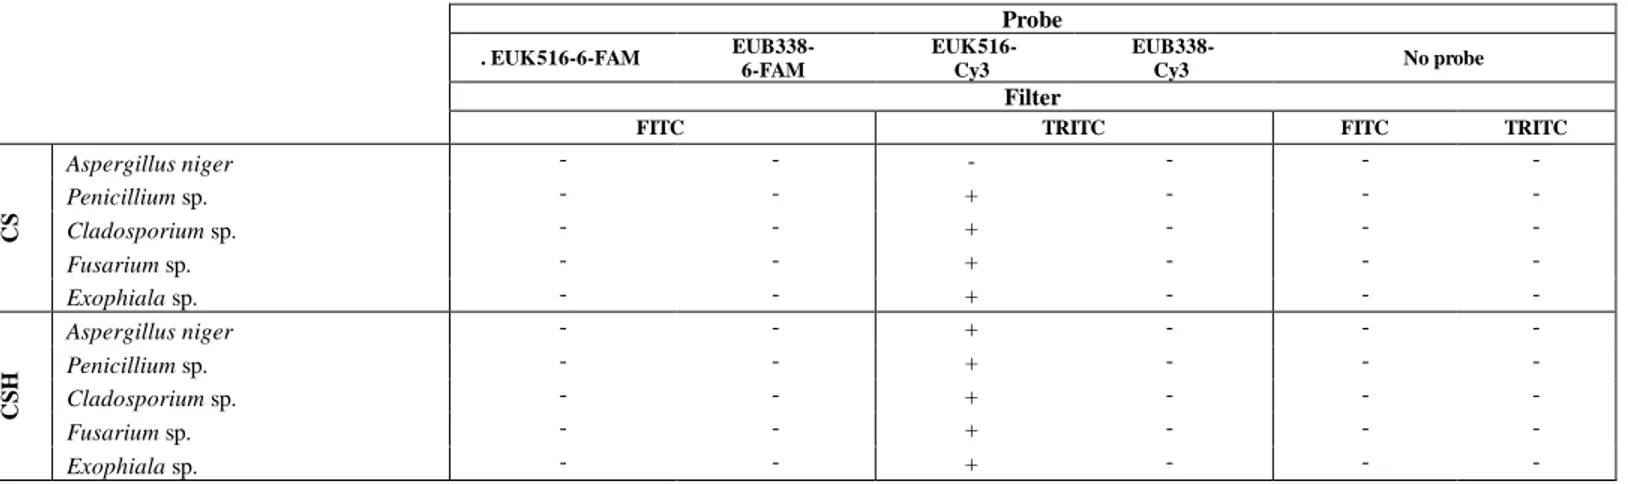 Table 3. Detected (+) and non-detected (-) fluorescent signals applying the M5 permeabilization method as the first step of RNA-FISH for all the filamentous  fungi  under  study  after  three  months  of  storage  at  4ºC